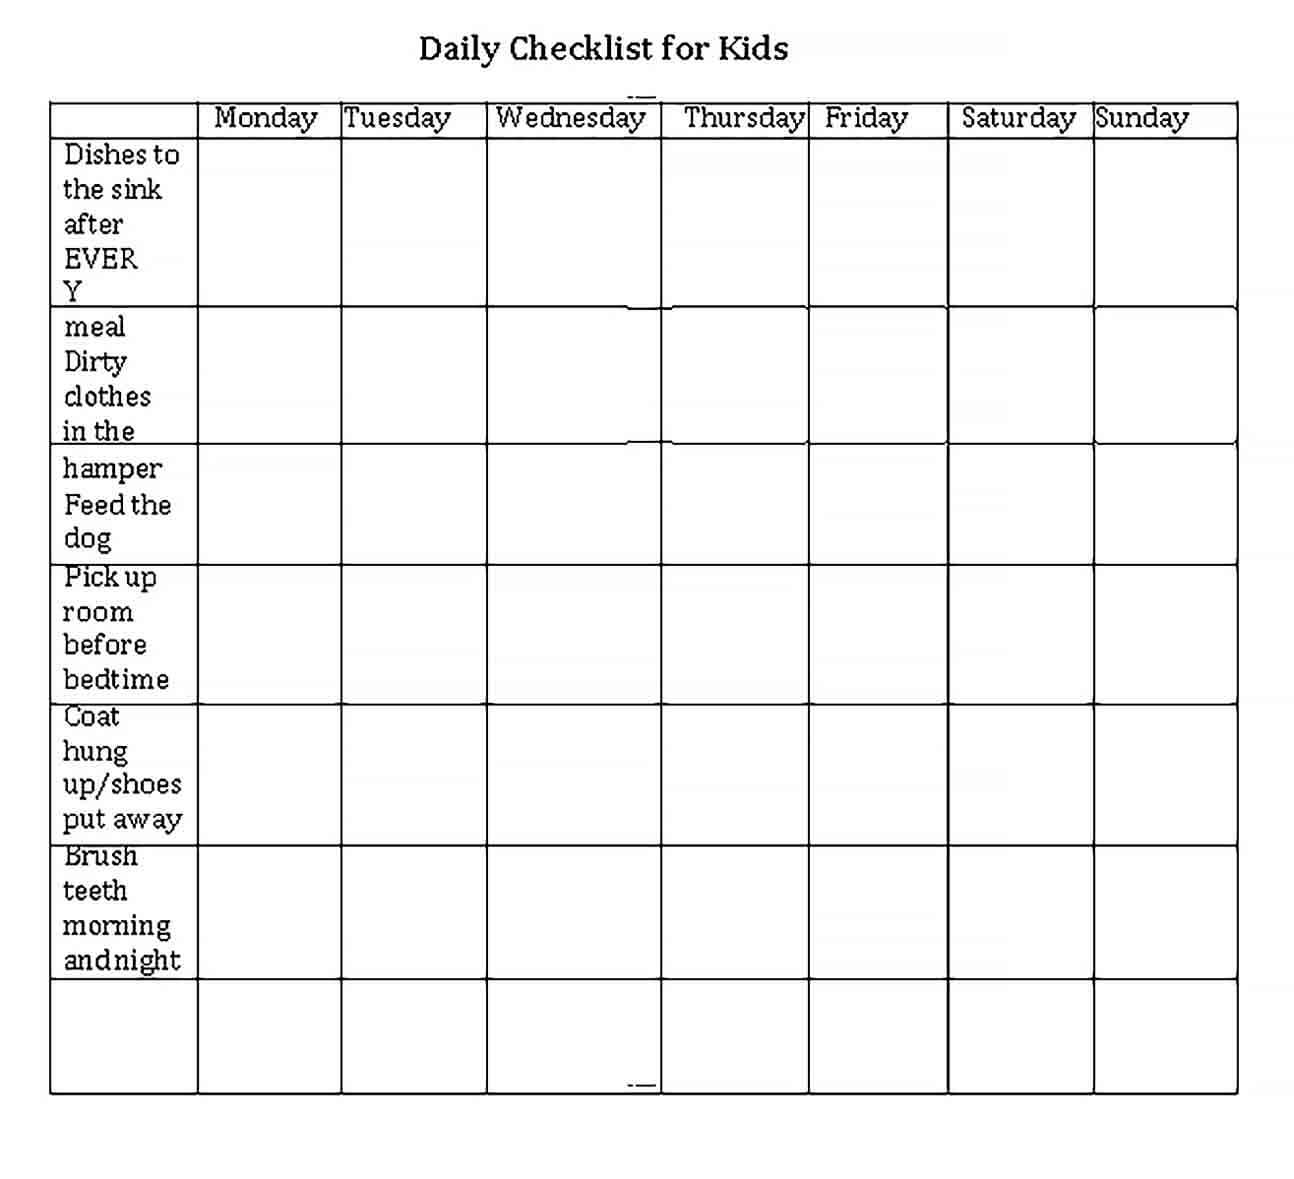 Sample Daily Checklist for Kids